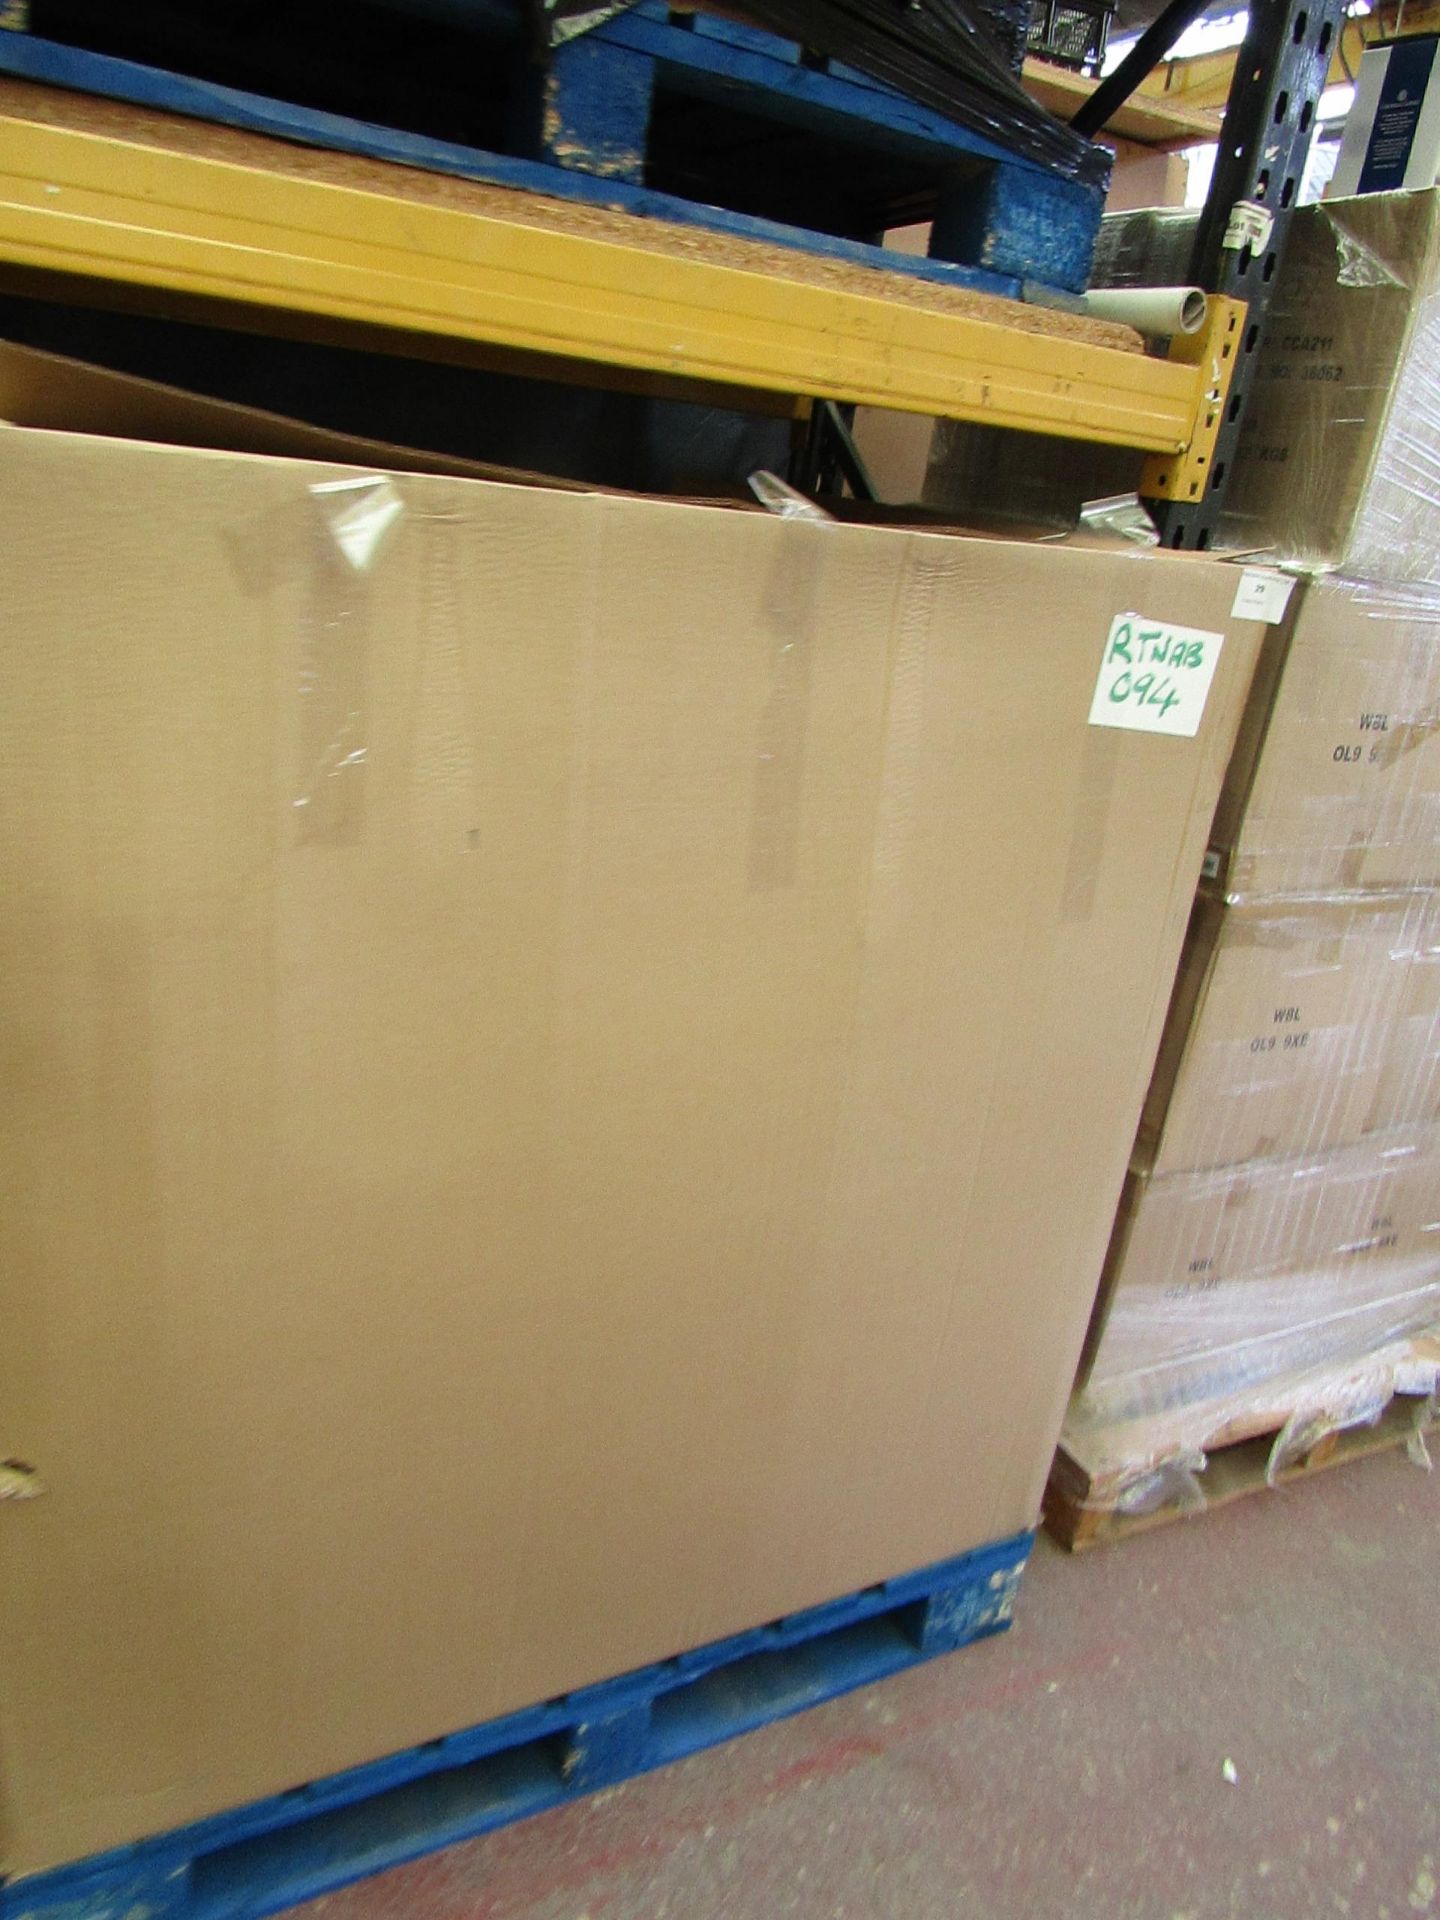 | 30X | THE PALLET CONTAINS VARIOUS SIZED YAWN AIR BEDS | BOXED AND UNCHECKED | NO ONLINE RE-